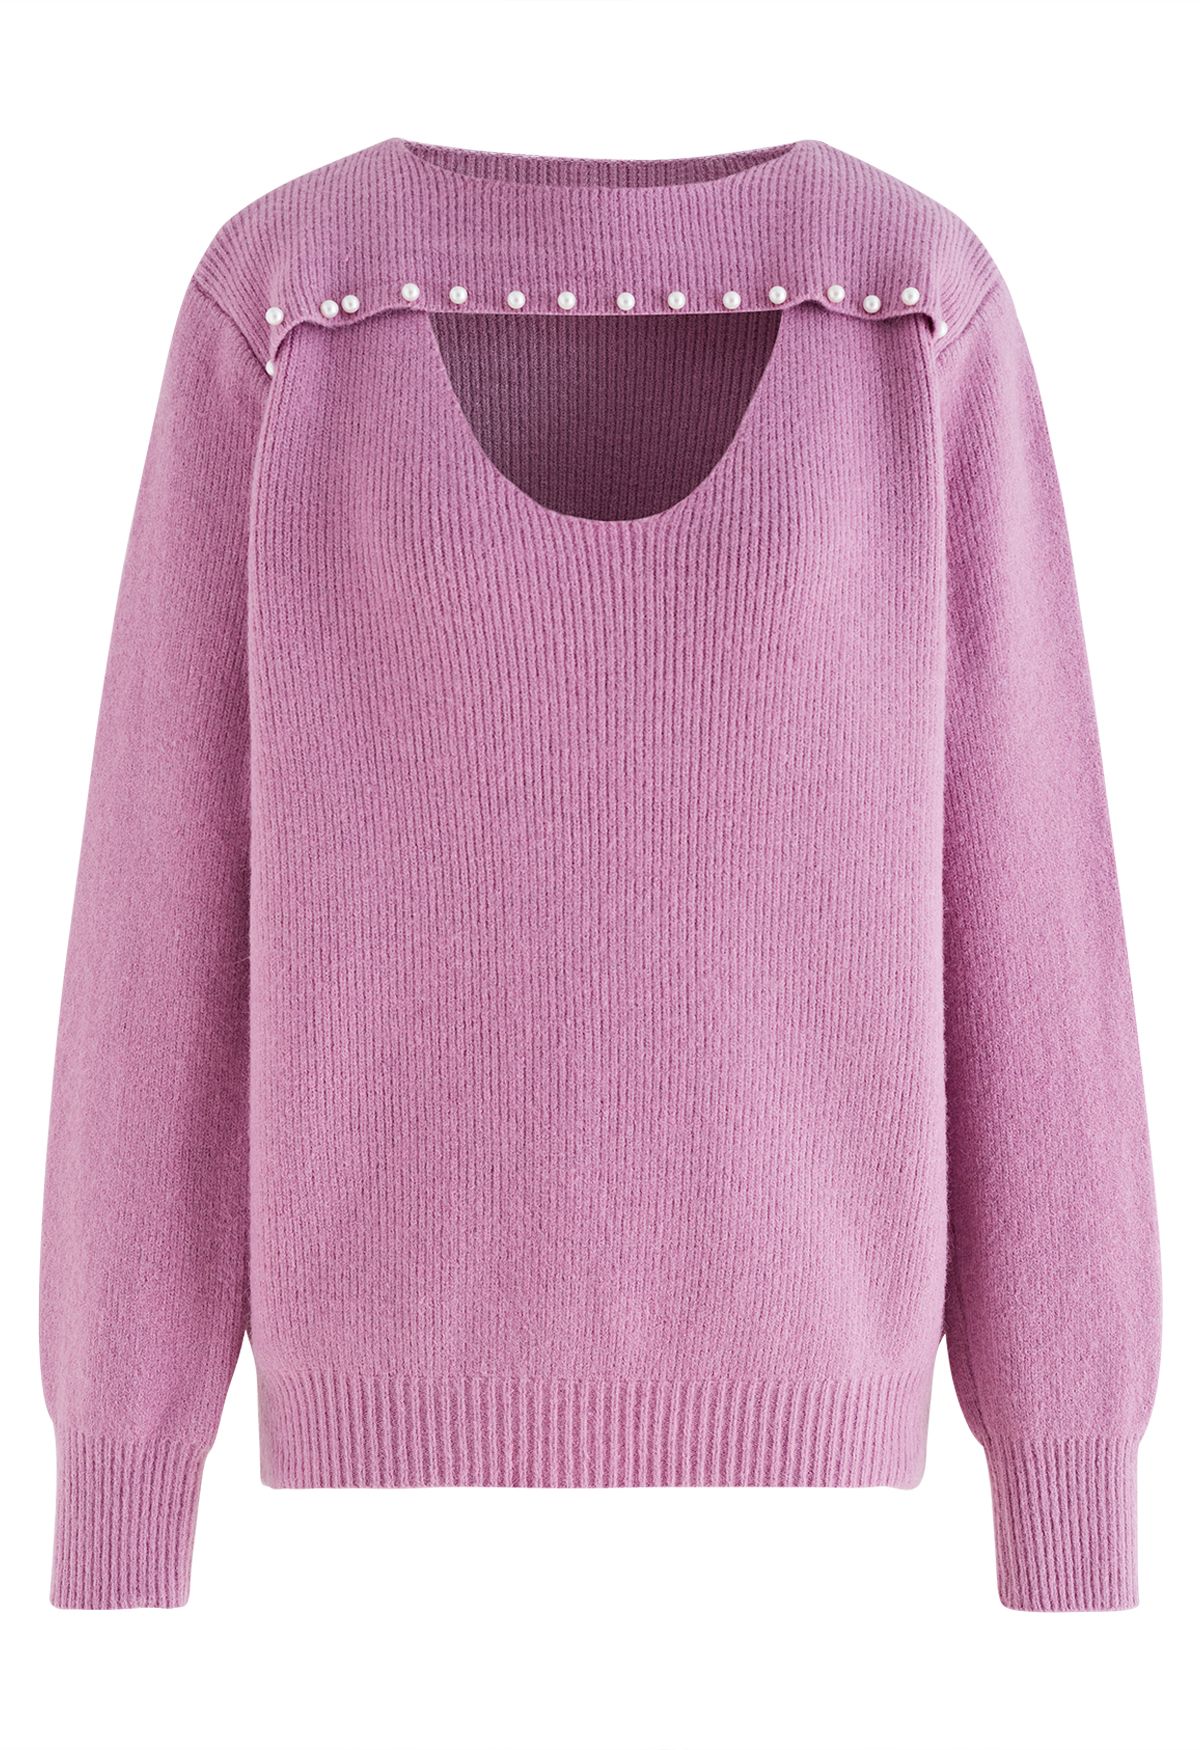 Cutout Pearl Neckline Knit Sweater in Pink